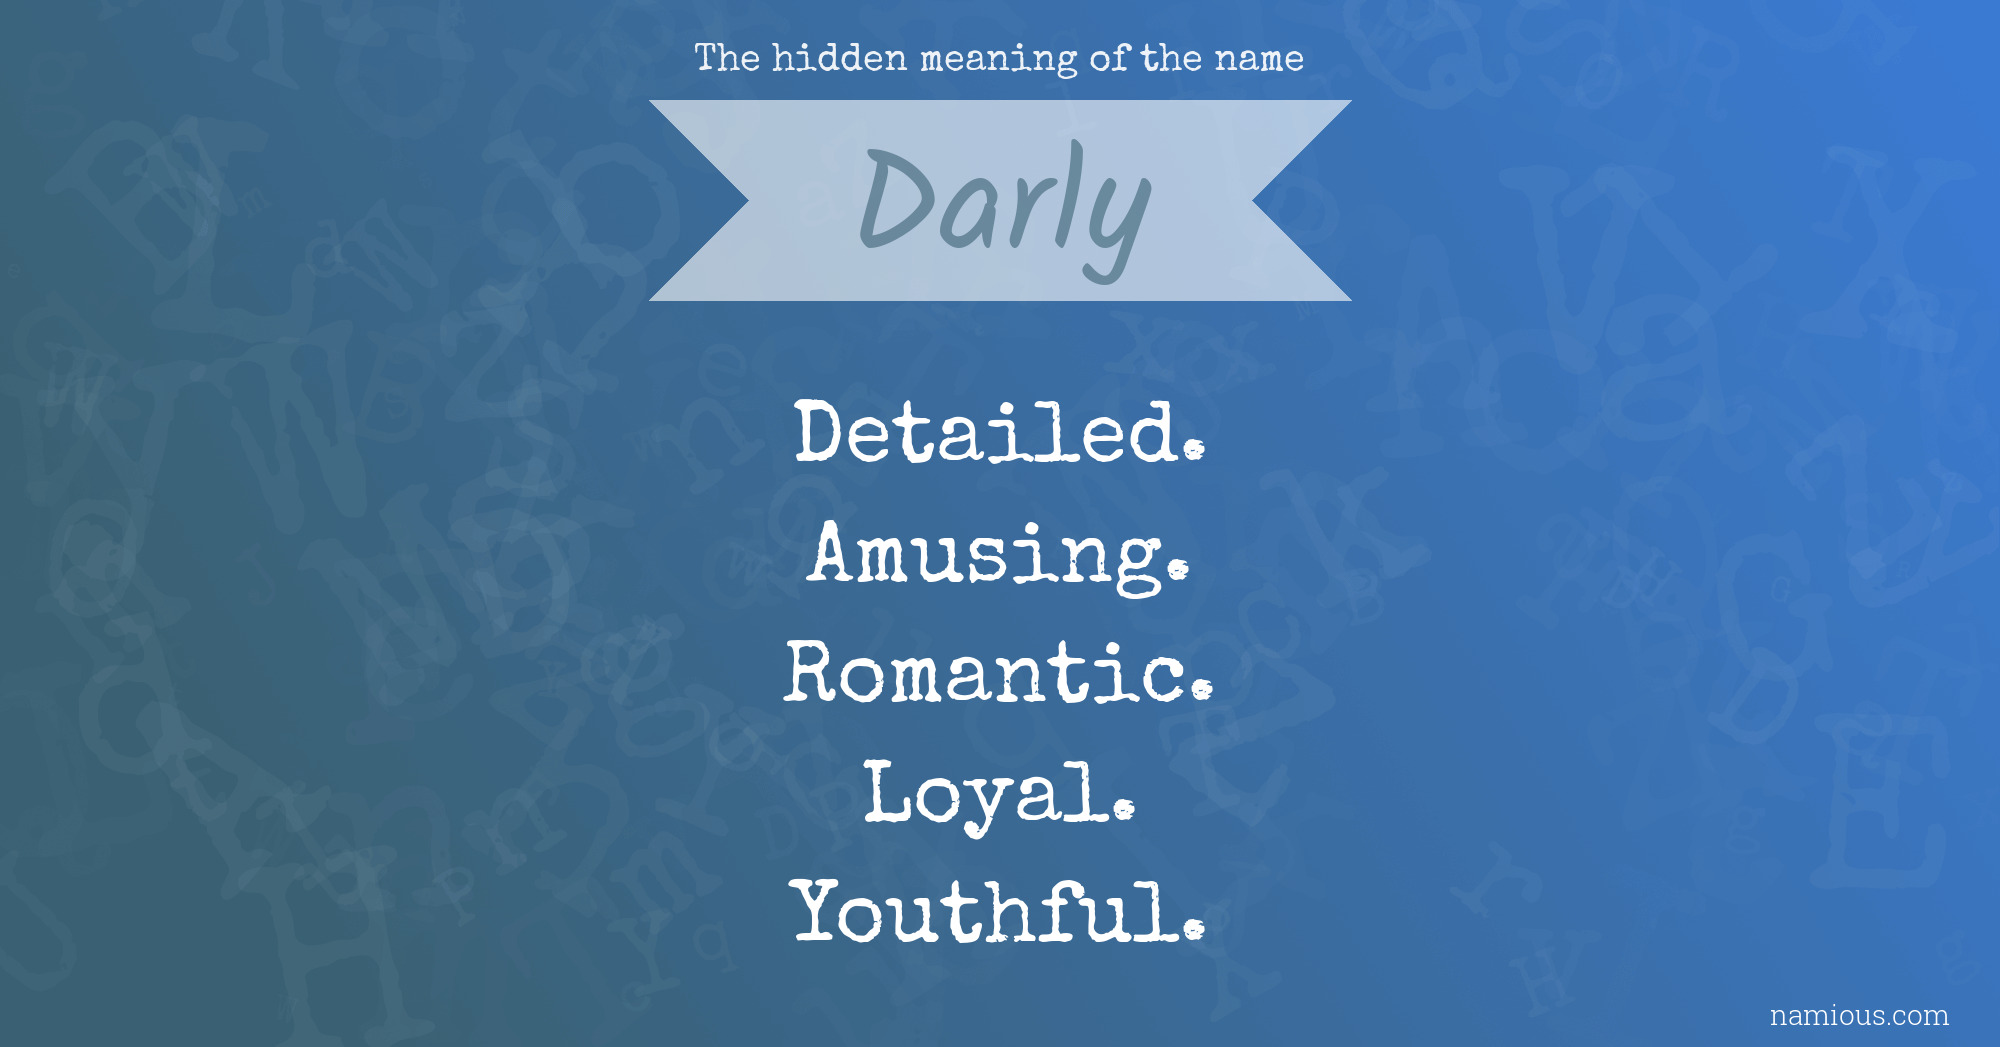 The hidden meaning of the name Darly